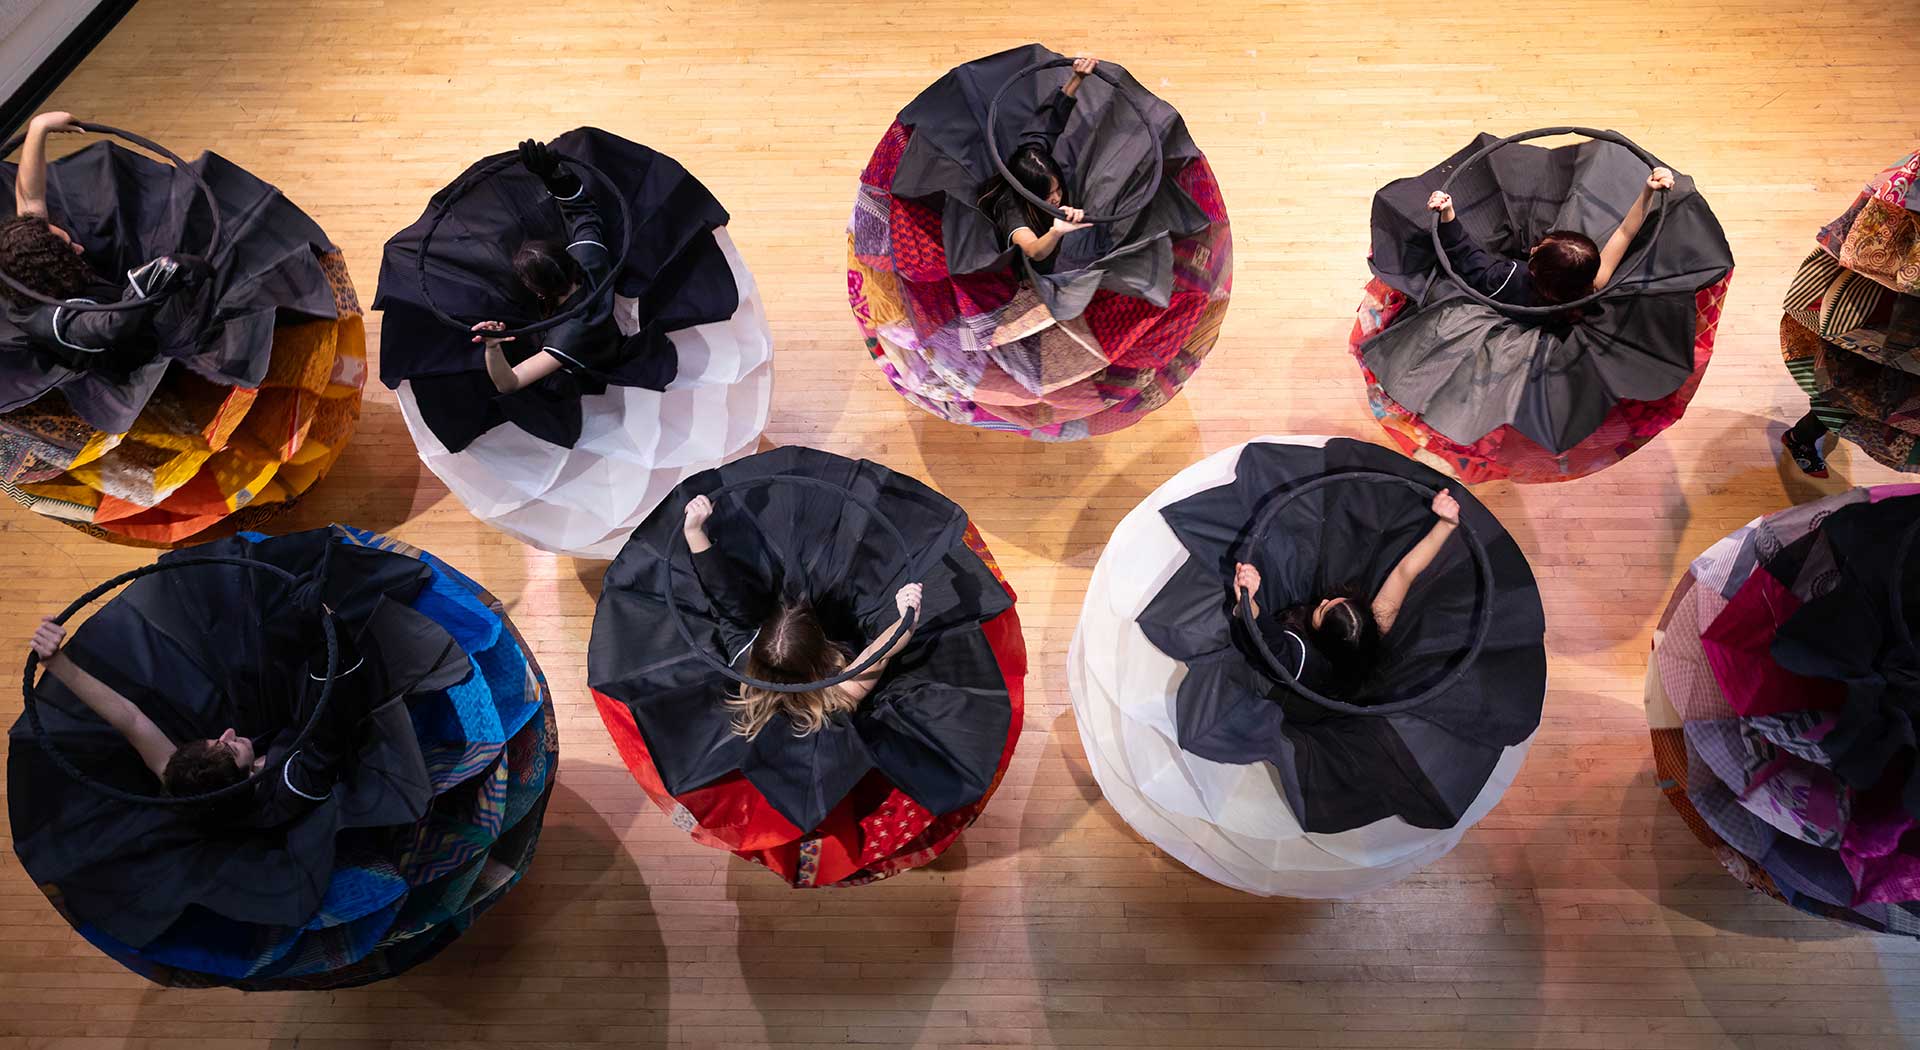 Aerial view of dancers in costumes spinning in a circular formation.